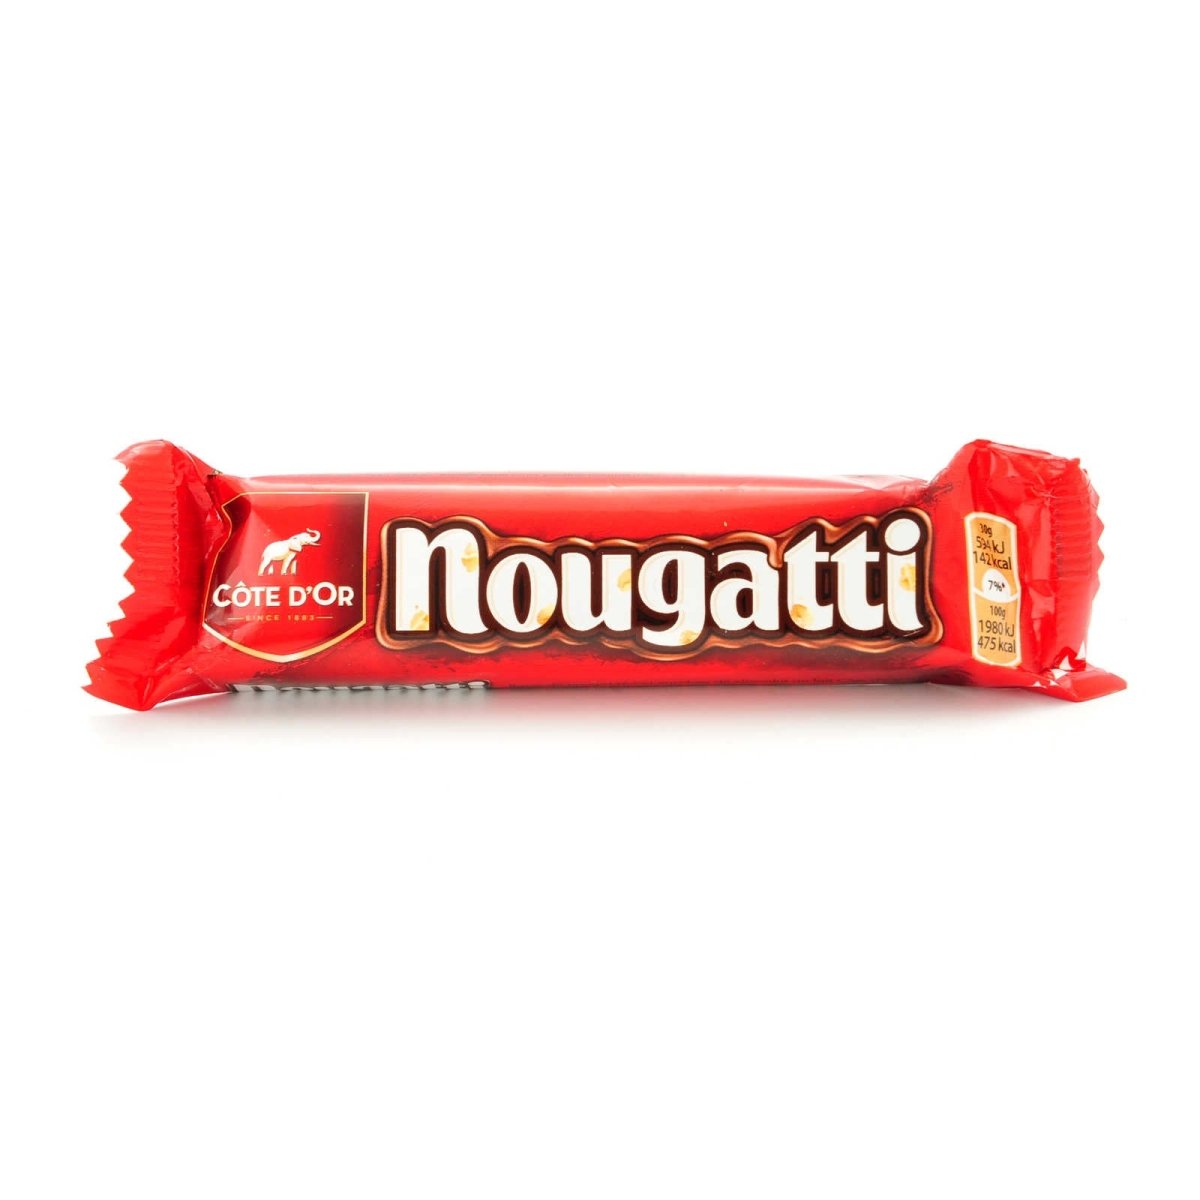  Cote D'Or Nougatti 9 x 30g : Grocery & Gourmet Food